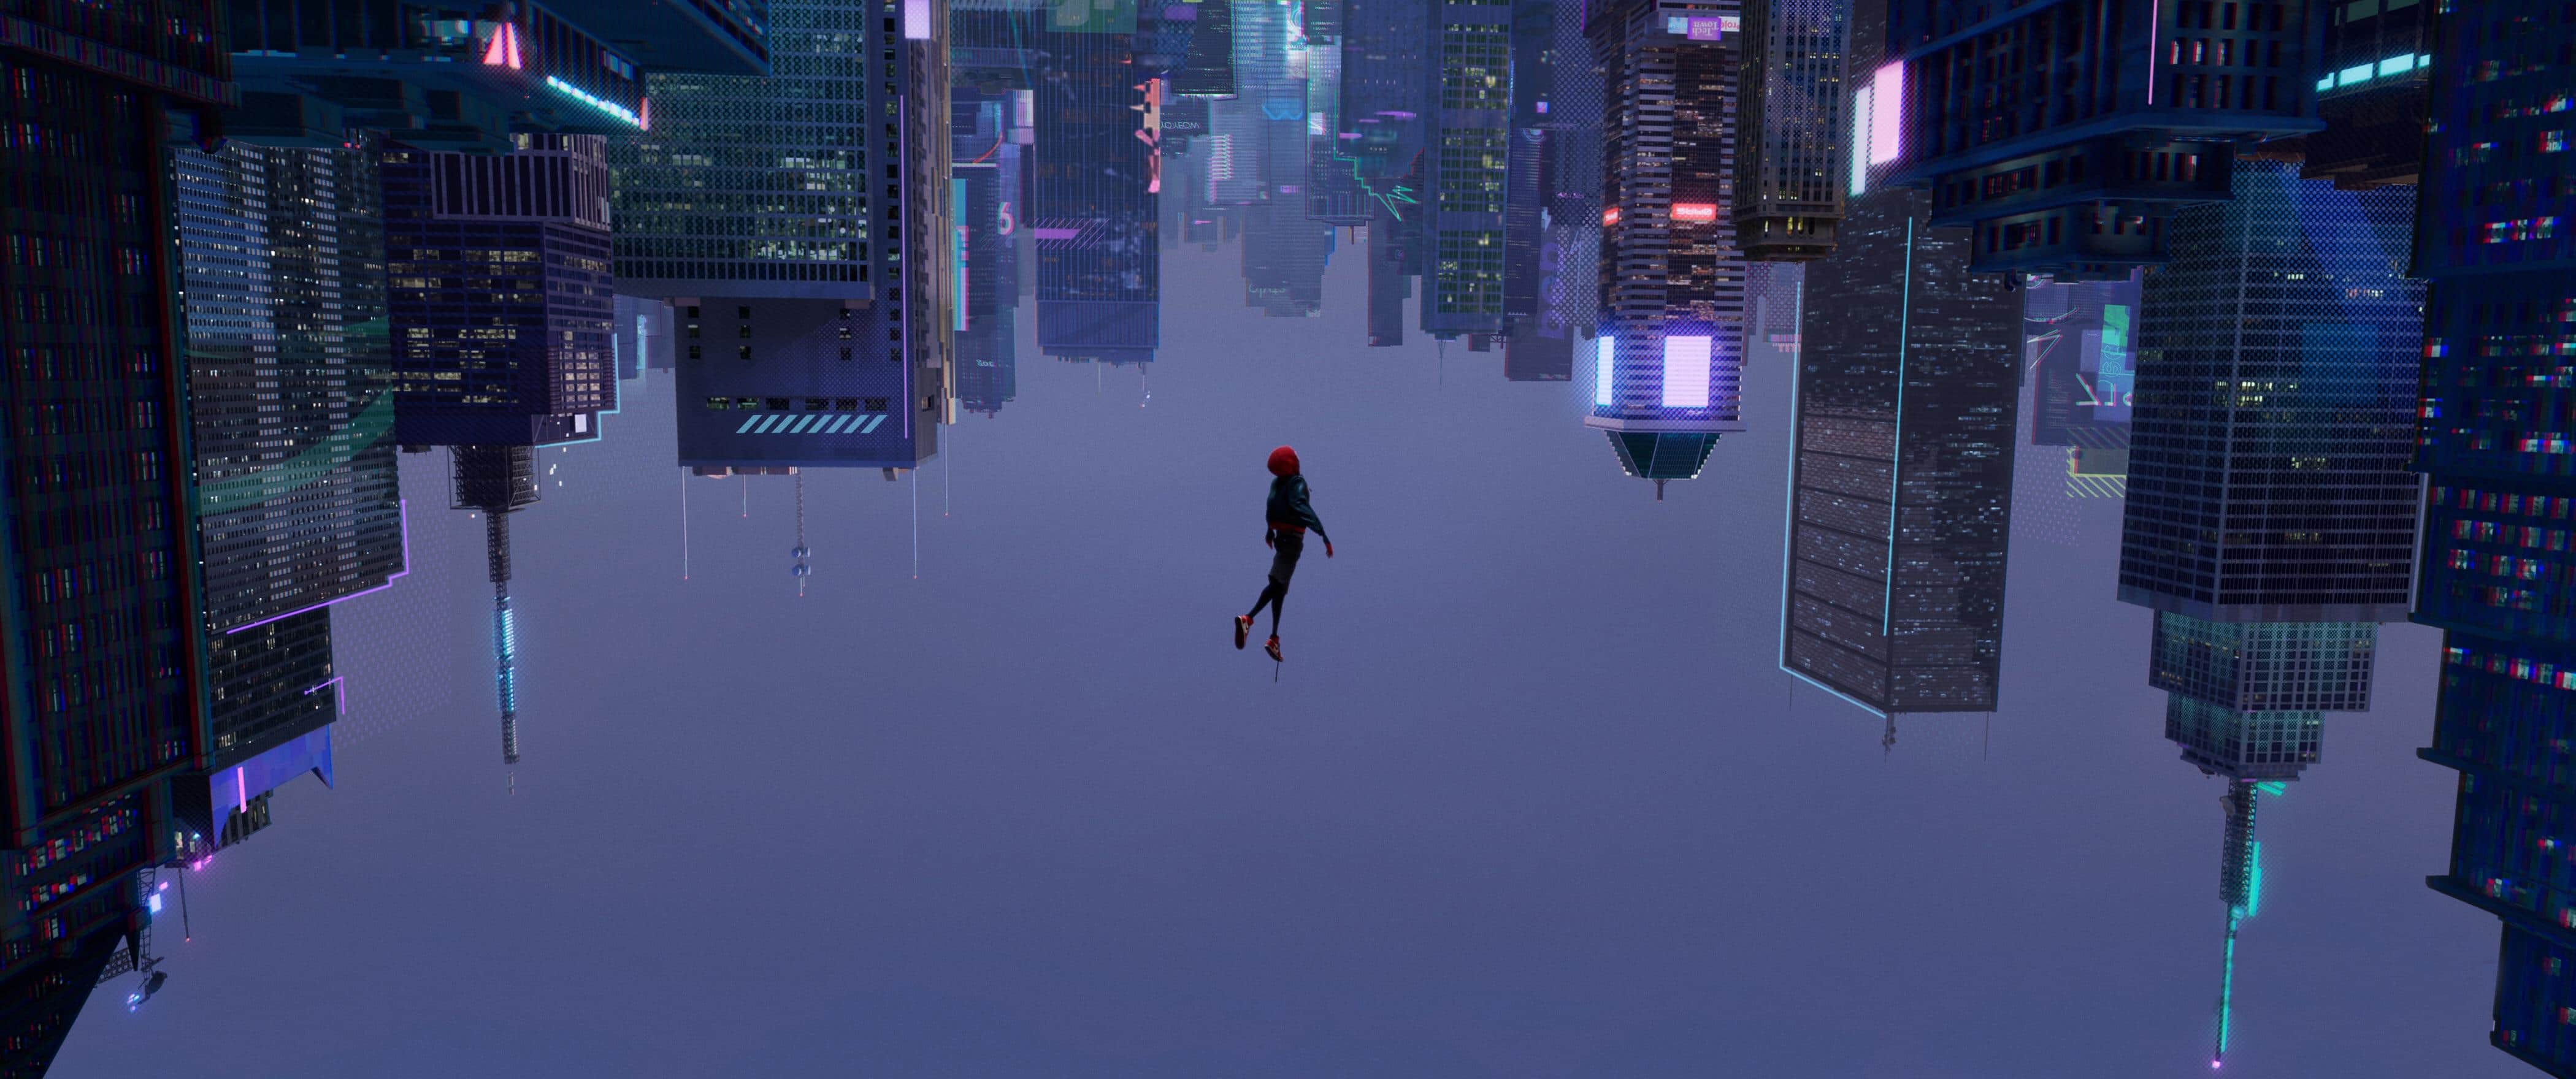 H-Spiderman-Into-the-Spider-Verse-Cover-Photo.jpg